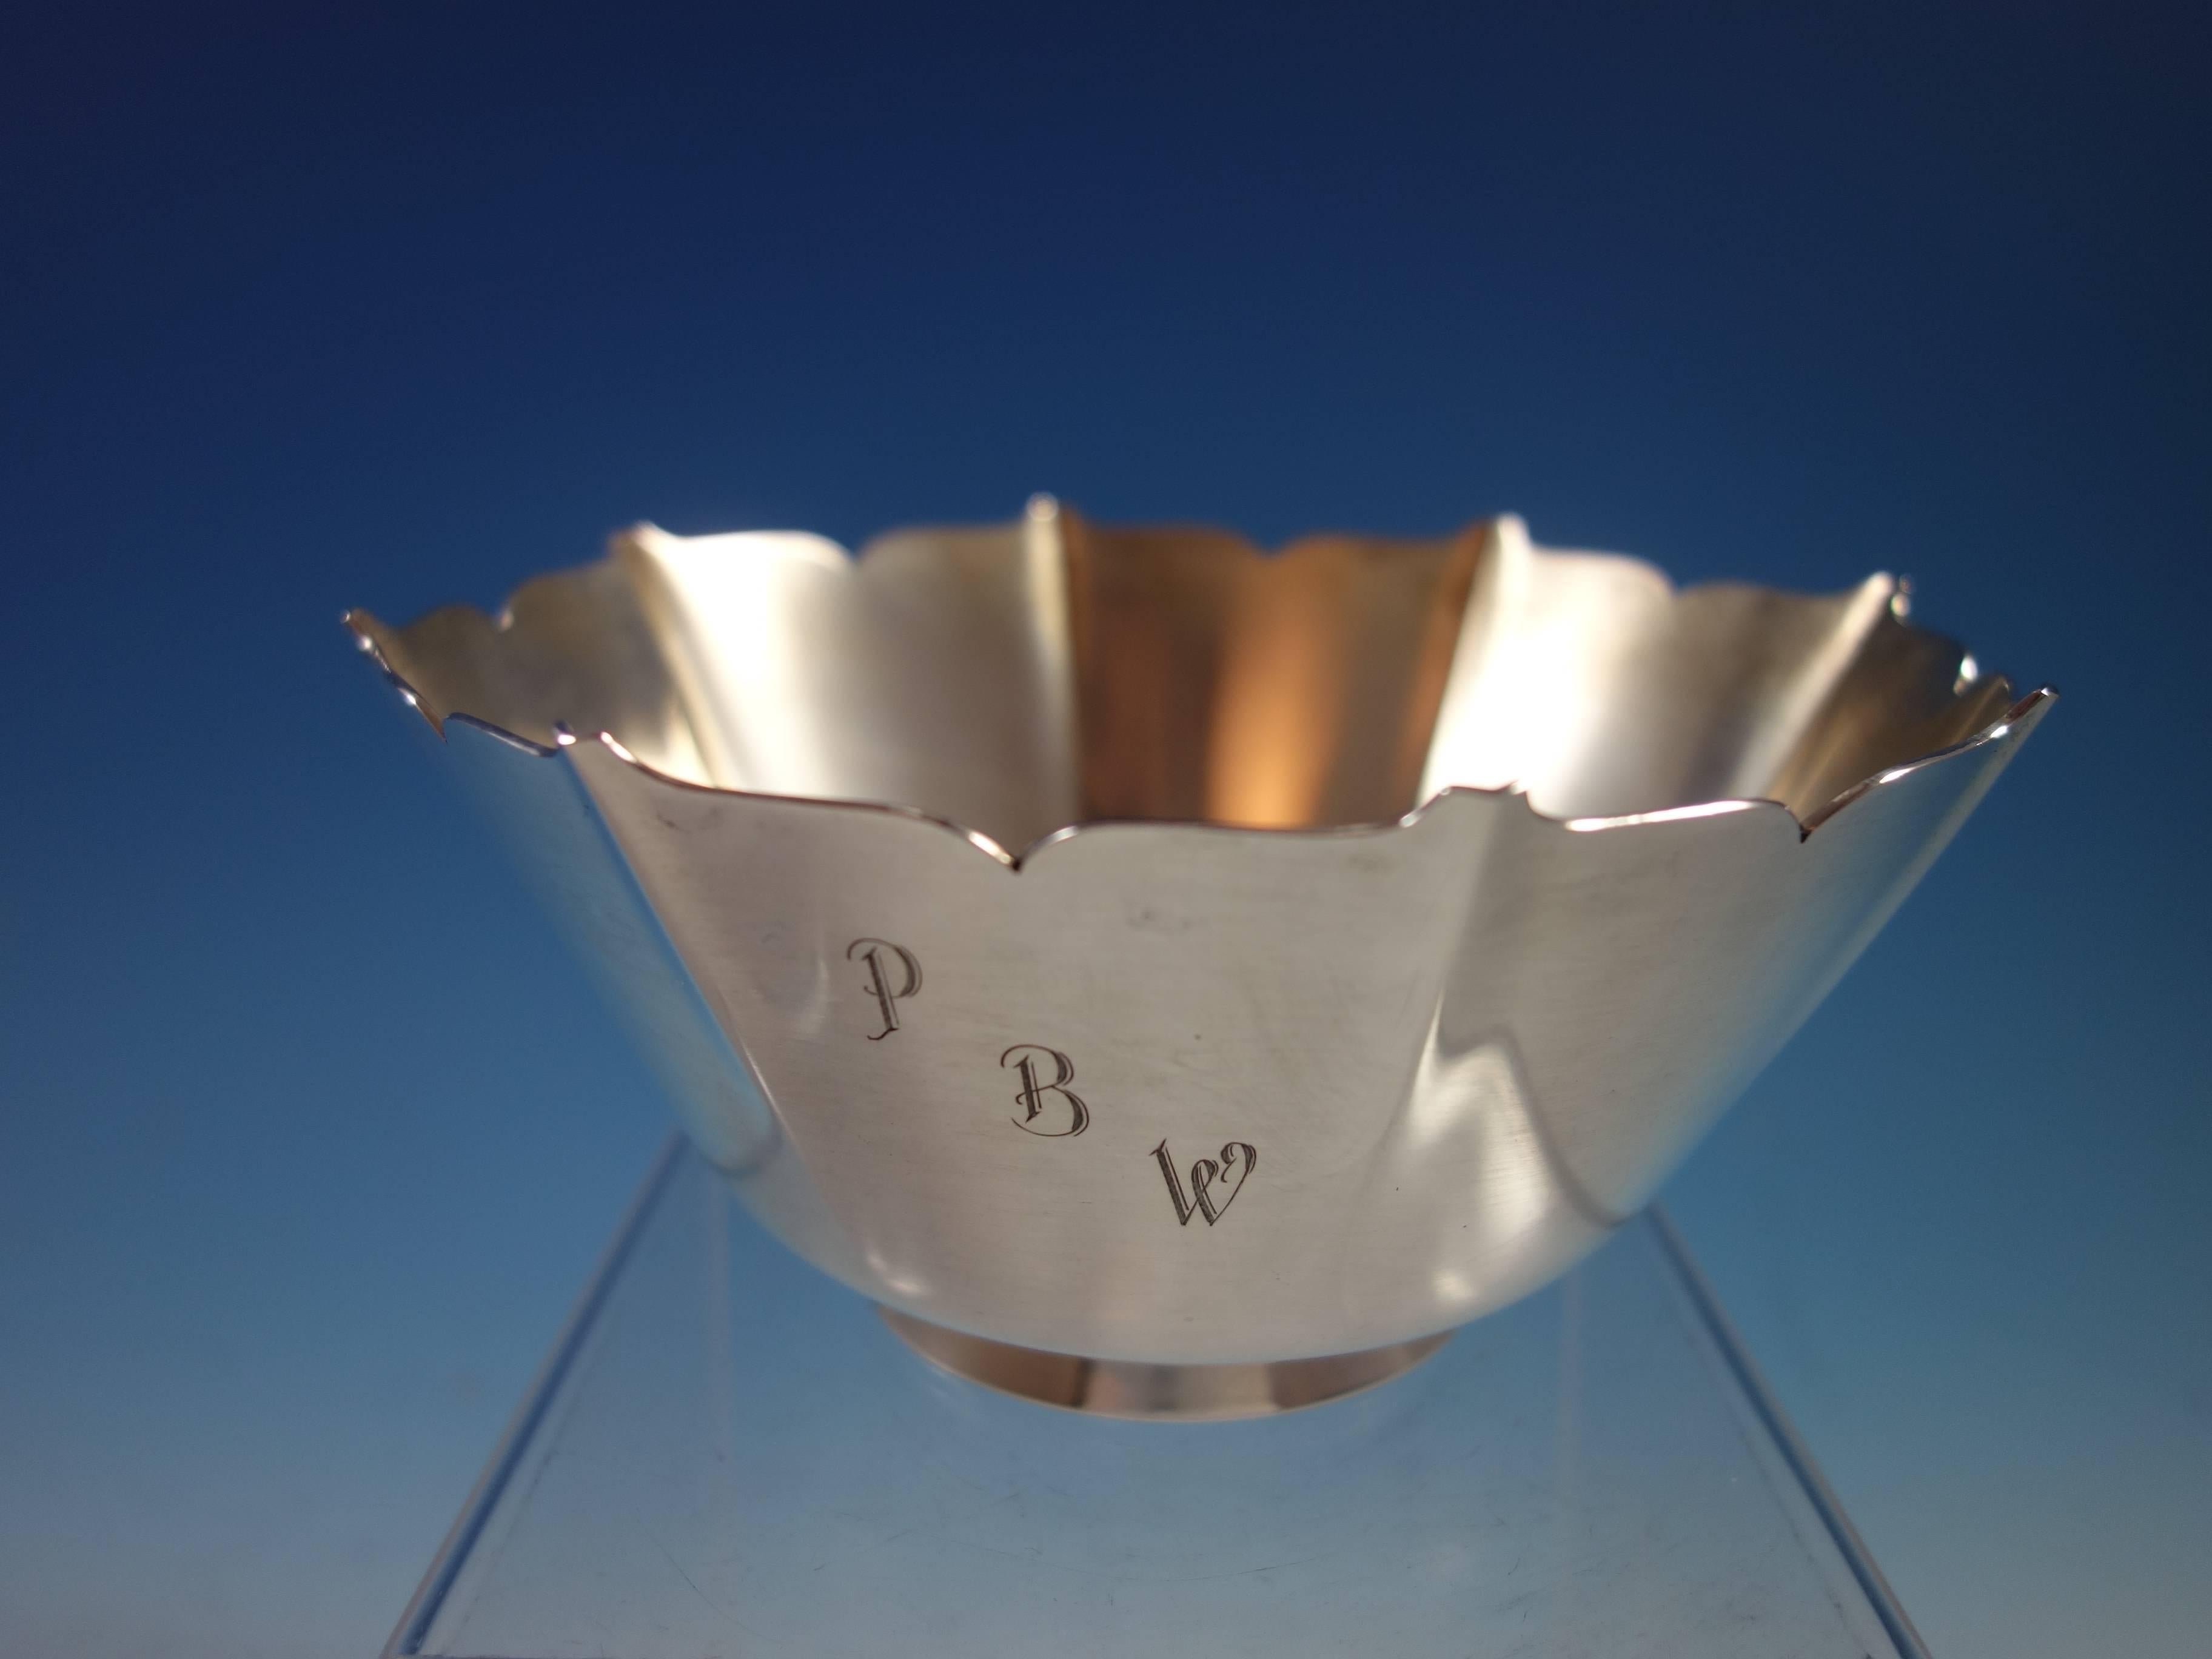 Stunning Esprit by Gorham sterling silver bowl. It's marked with #1429 and date mark for 1960. It measures 6 1/8